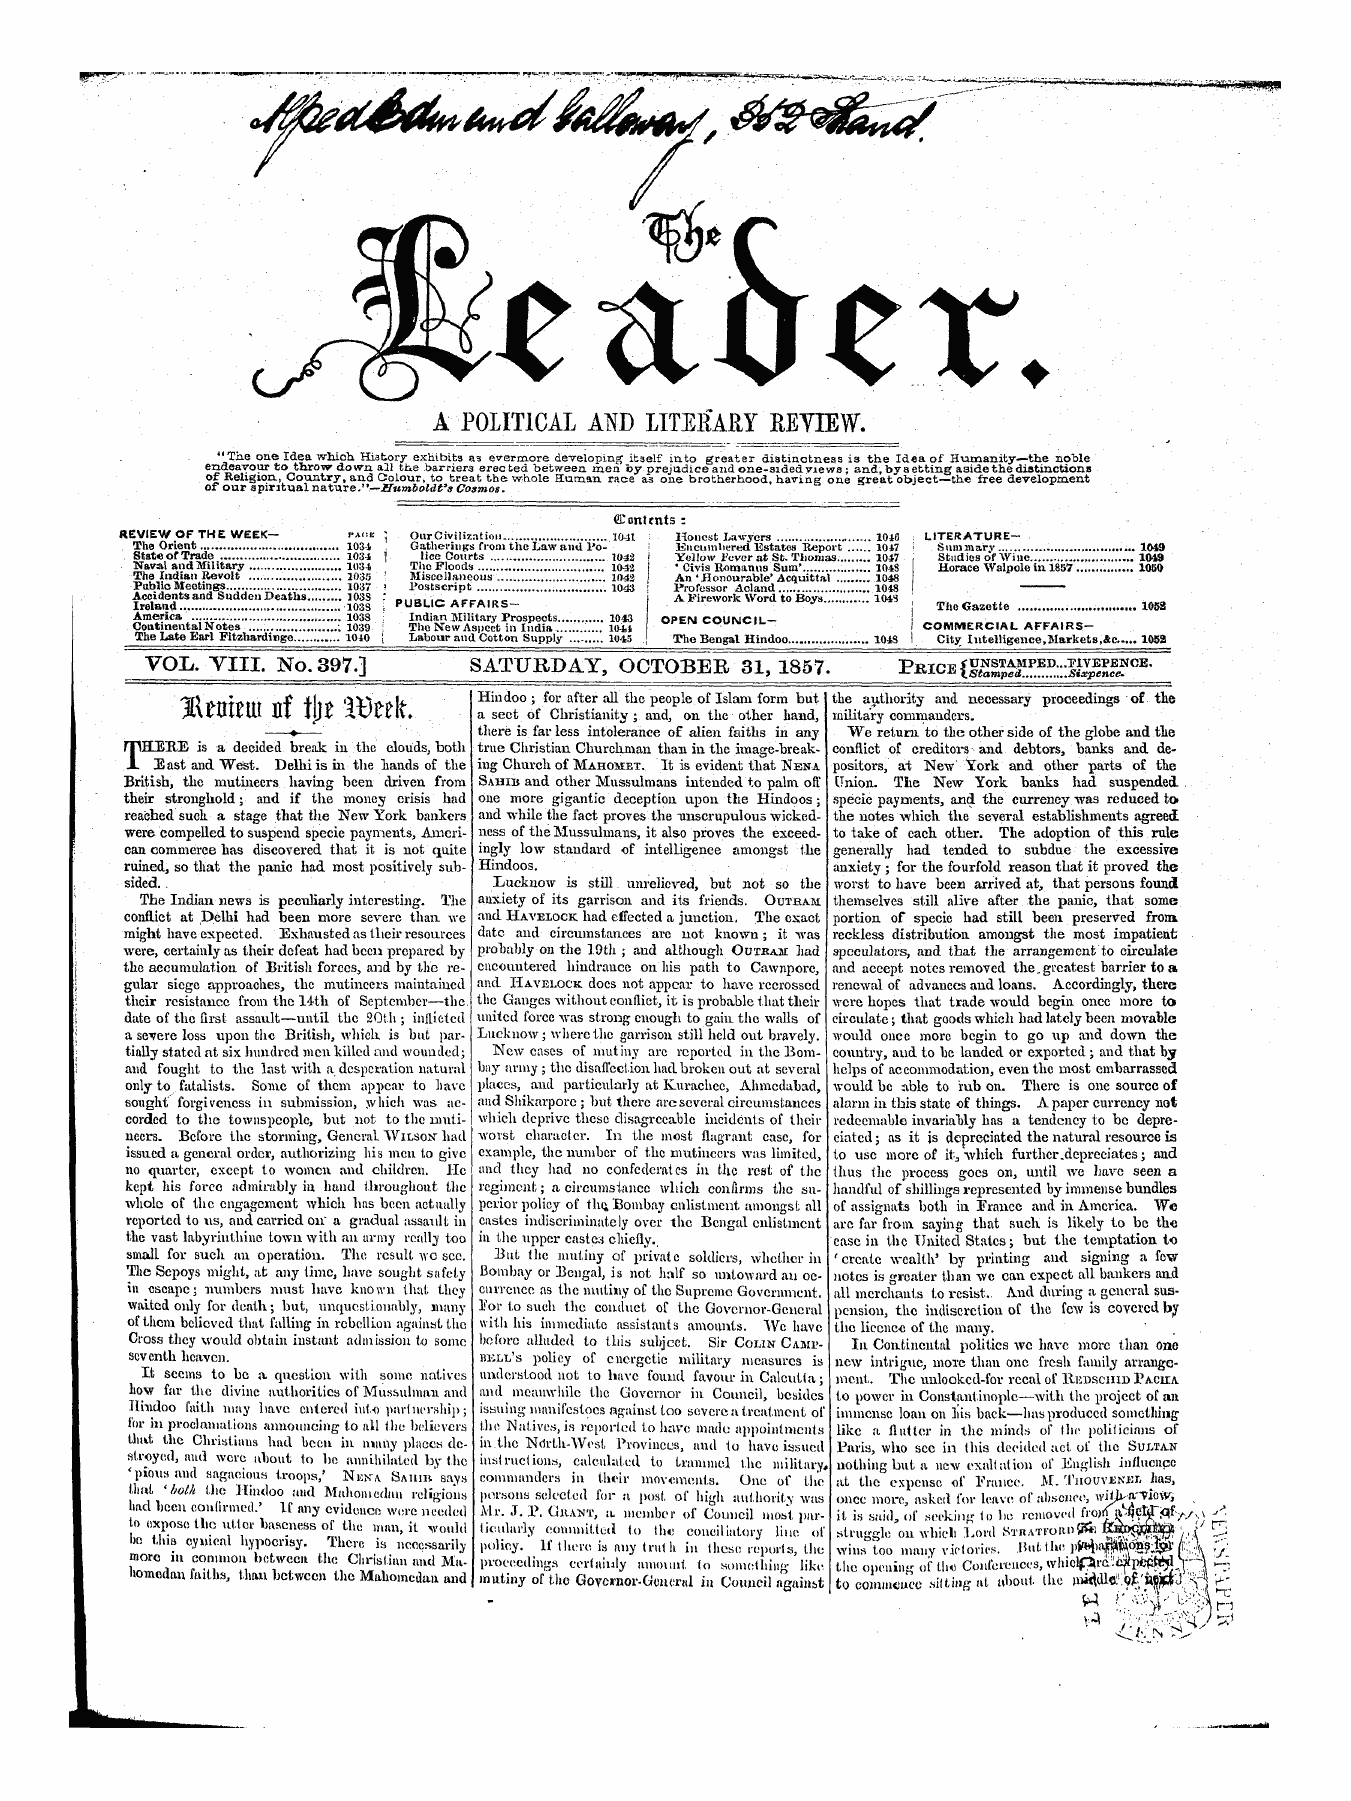 Leader (1850-1860): jS F Y, 1st edition - Theue Is A Decided Break In The Clouds, ...